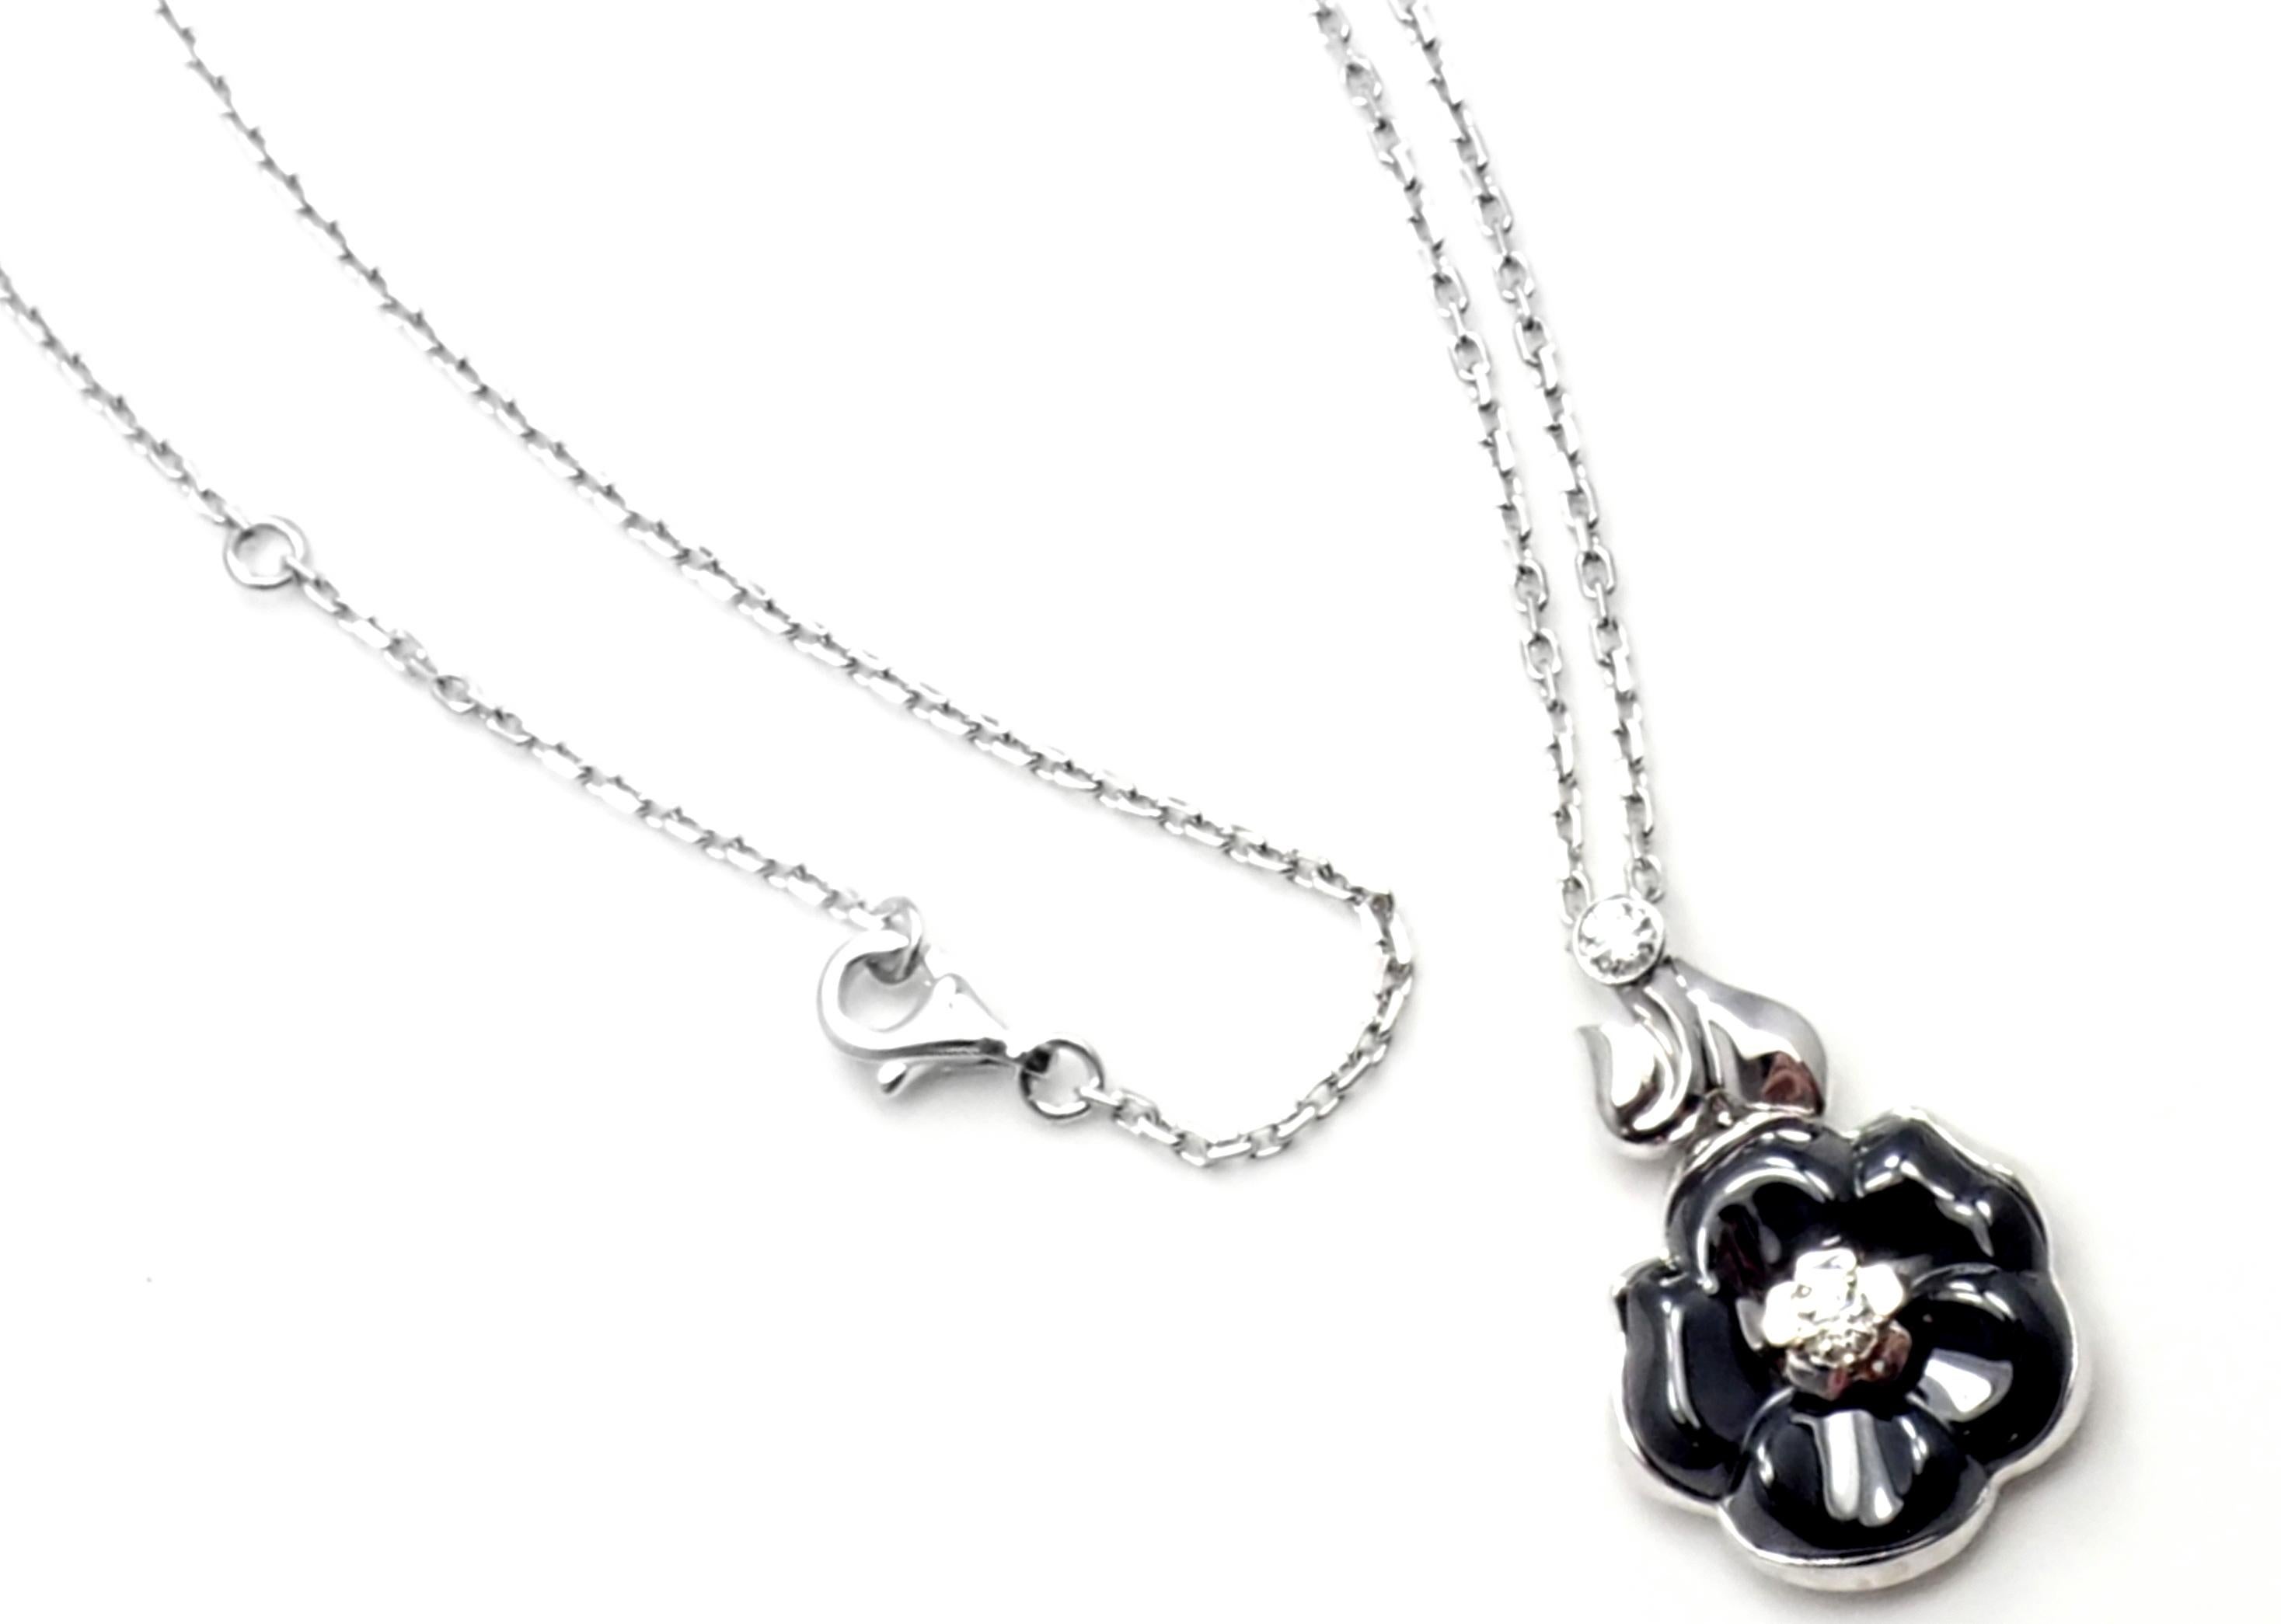 18k White Gold Diamond Black Ceramic Camelia Camellia Flower Pendant Necklace by Chanel. 
With 2 round brilliant cut diamond VVS1 clarity, E color total weight approx..20ct
Details: 
Length: 18